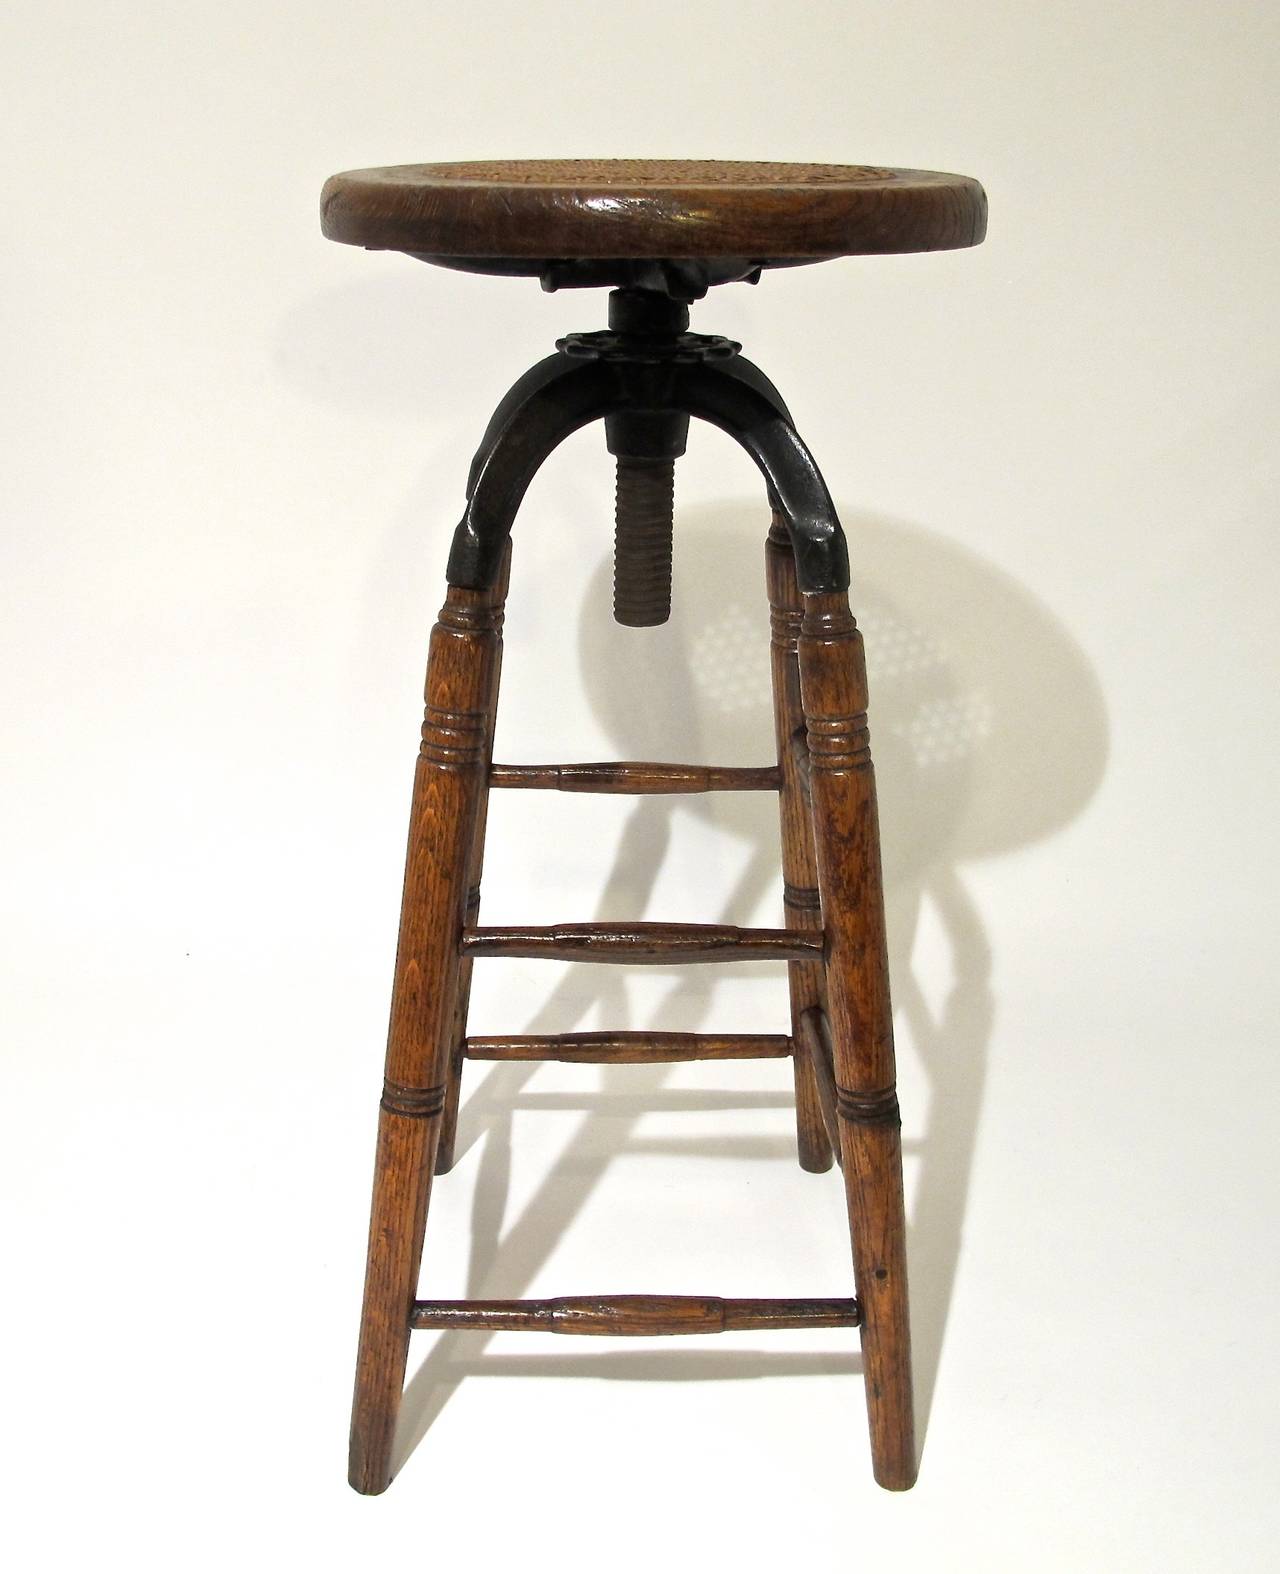 Swivel Cane Seat Stool with Iron supports and height adjuster on four oak legs and double rungs on all four sides.  American, Late 19th. Early 20th. Century.